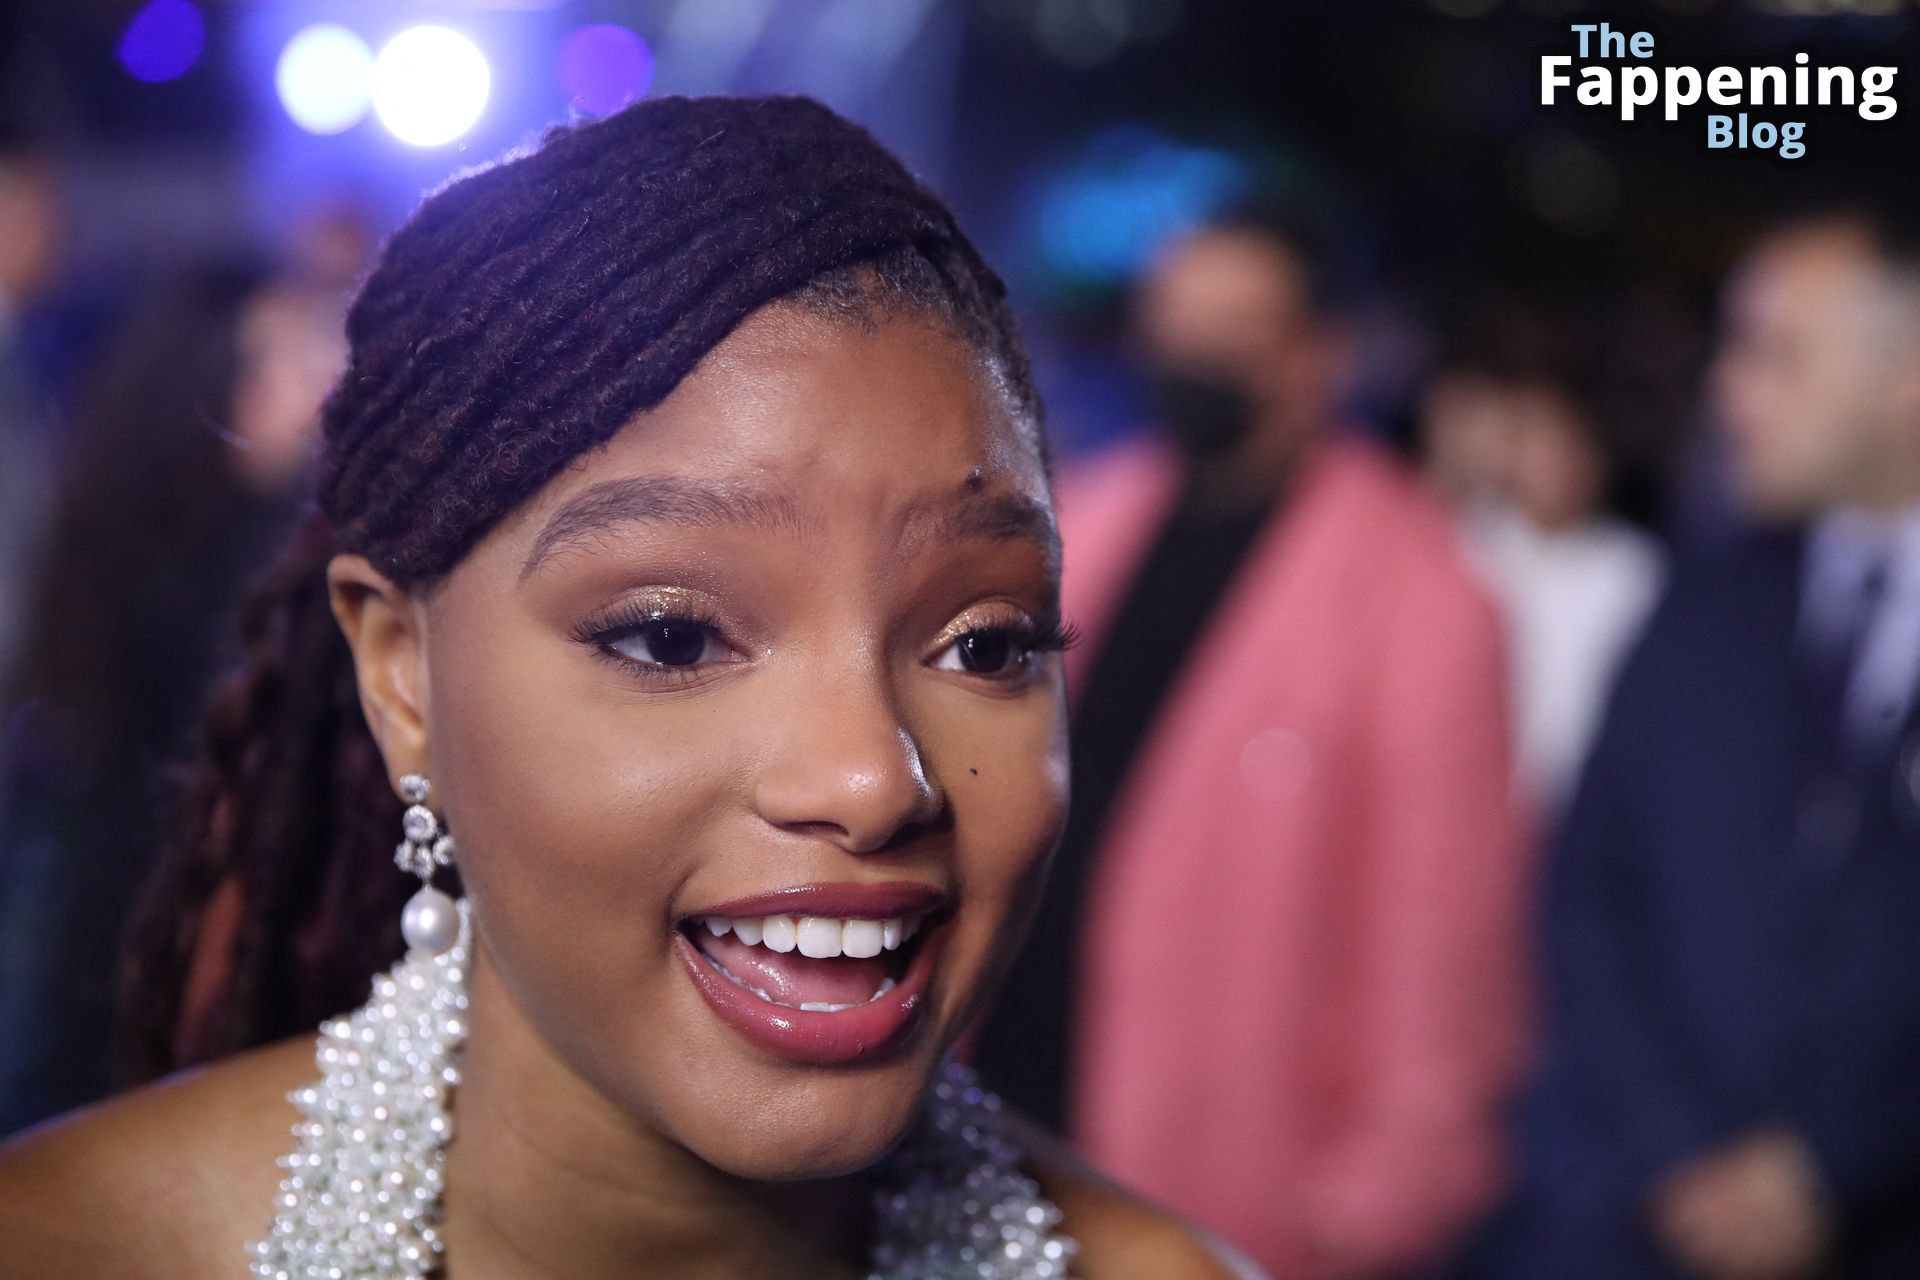 Halle Bailey Displays Her Sexy Boobs the Red Carpet of “The Little Mermaid” in Mexico City (62 Photos)